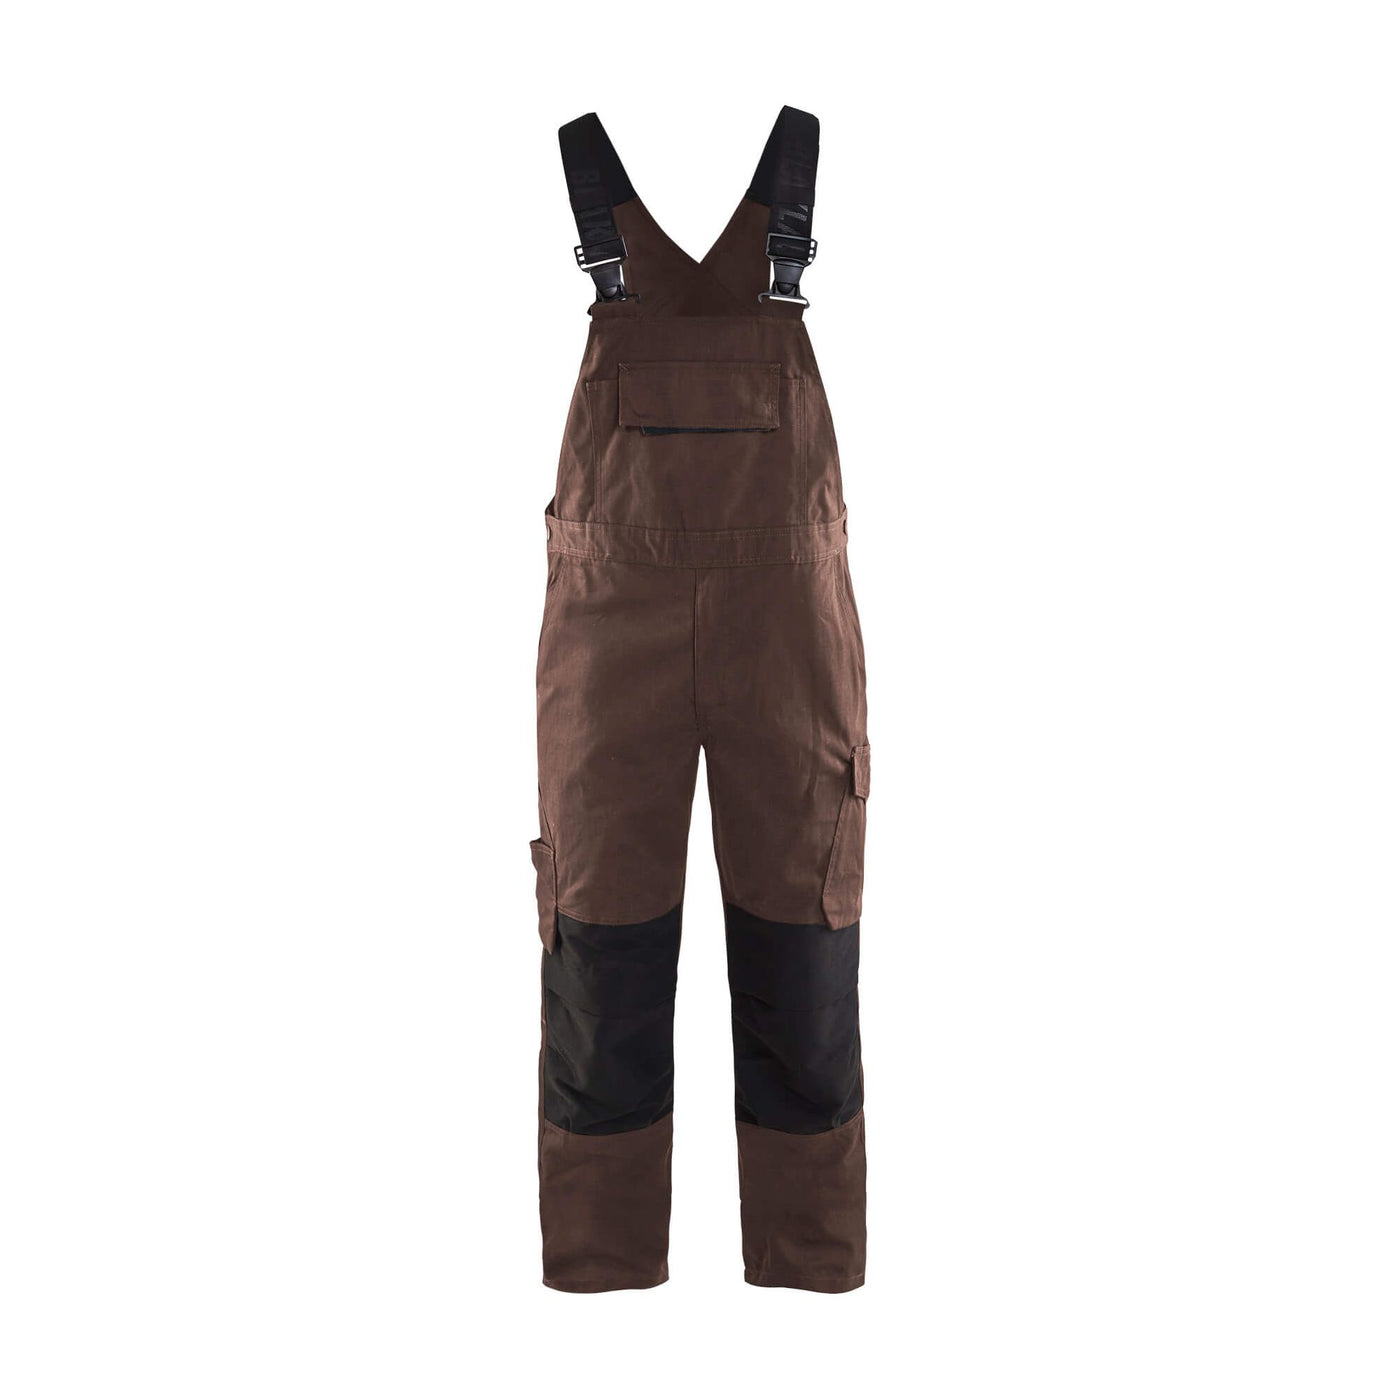 Blaklader 2695 Bib Overalls Trousers - Mens (26951330) -  (Colours 2 of 2)